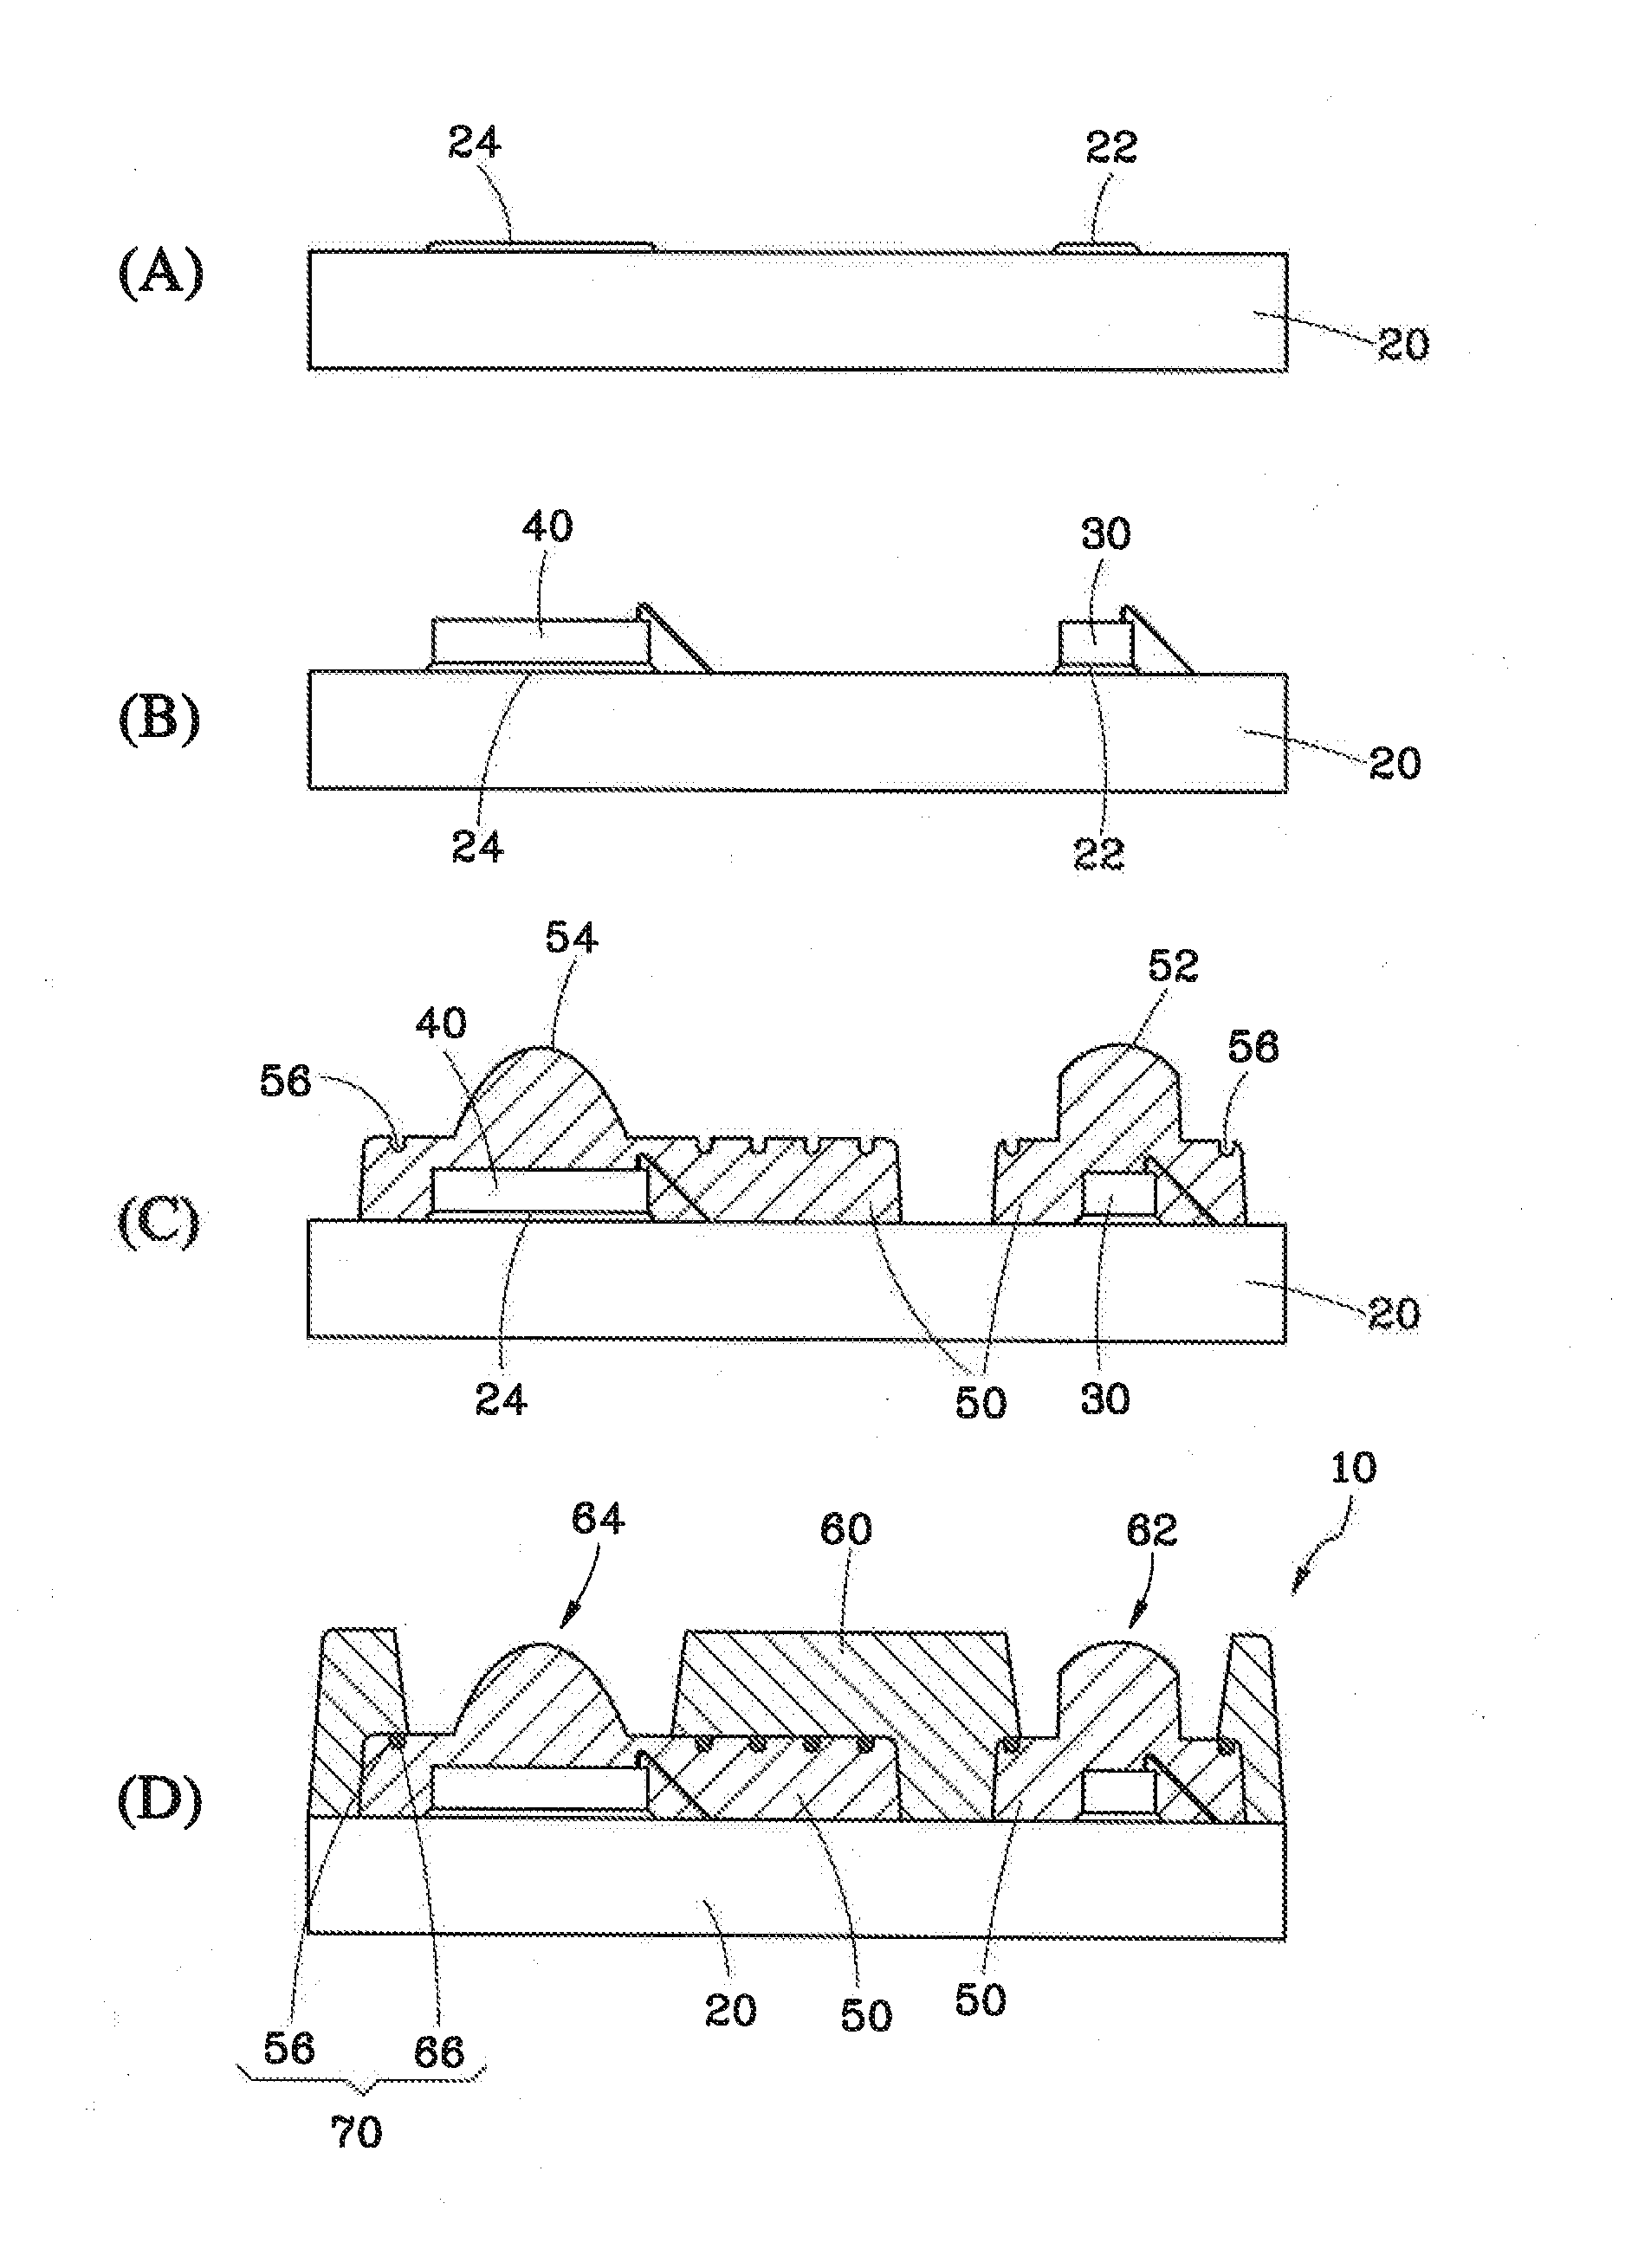 Package structure of an optical module